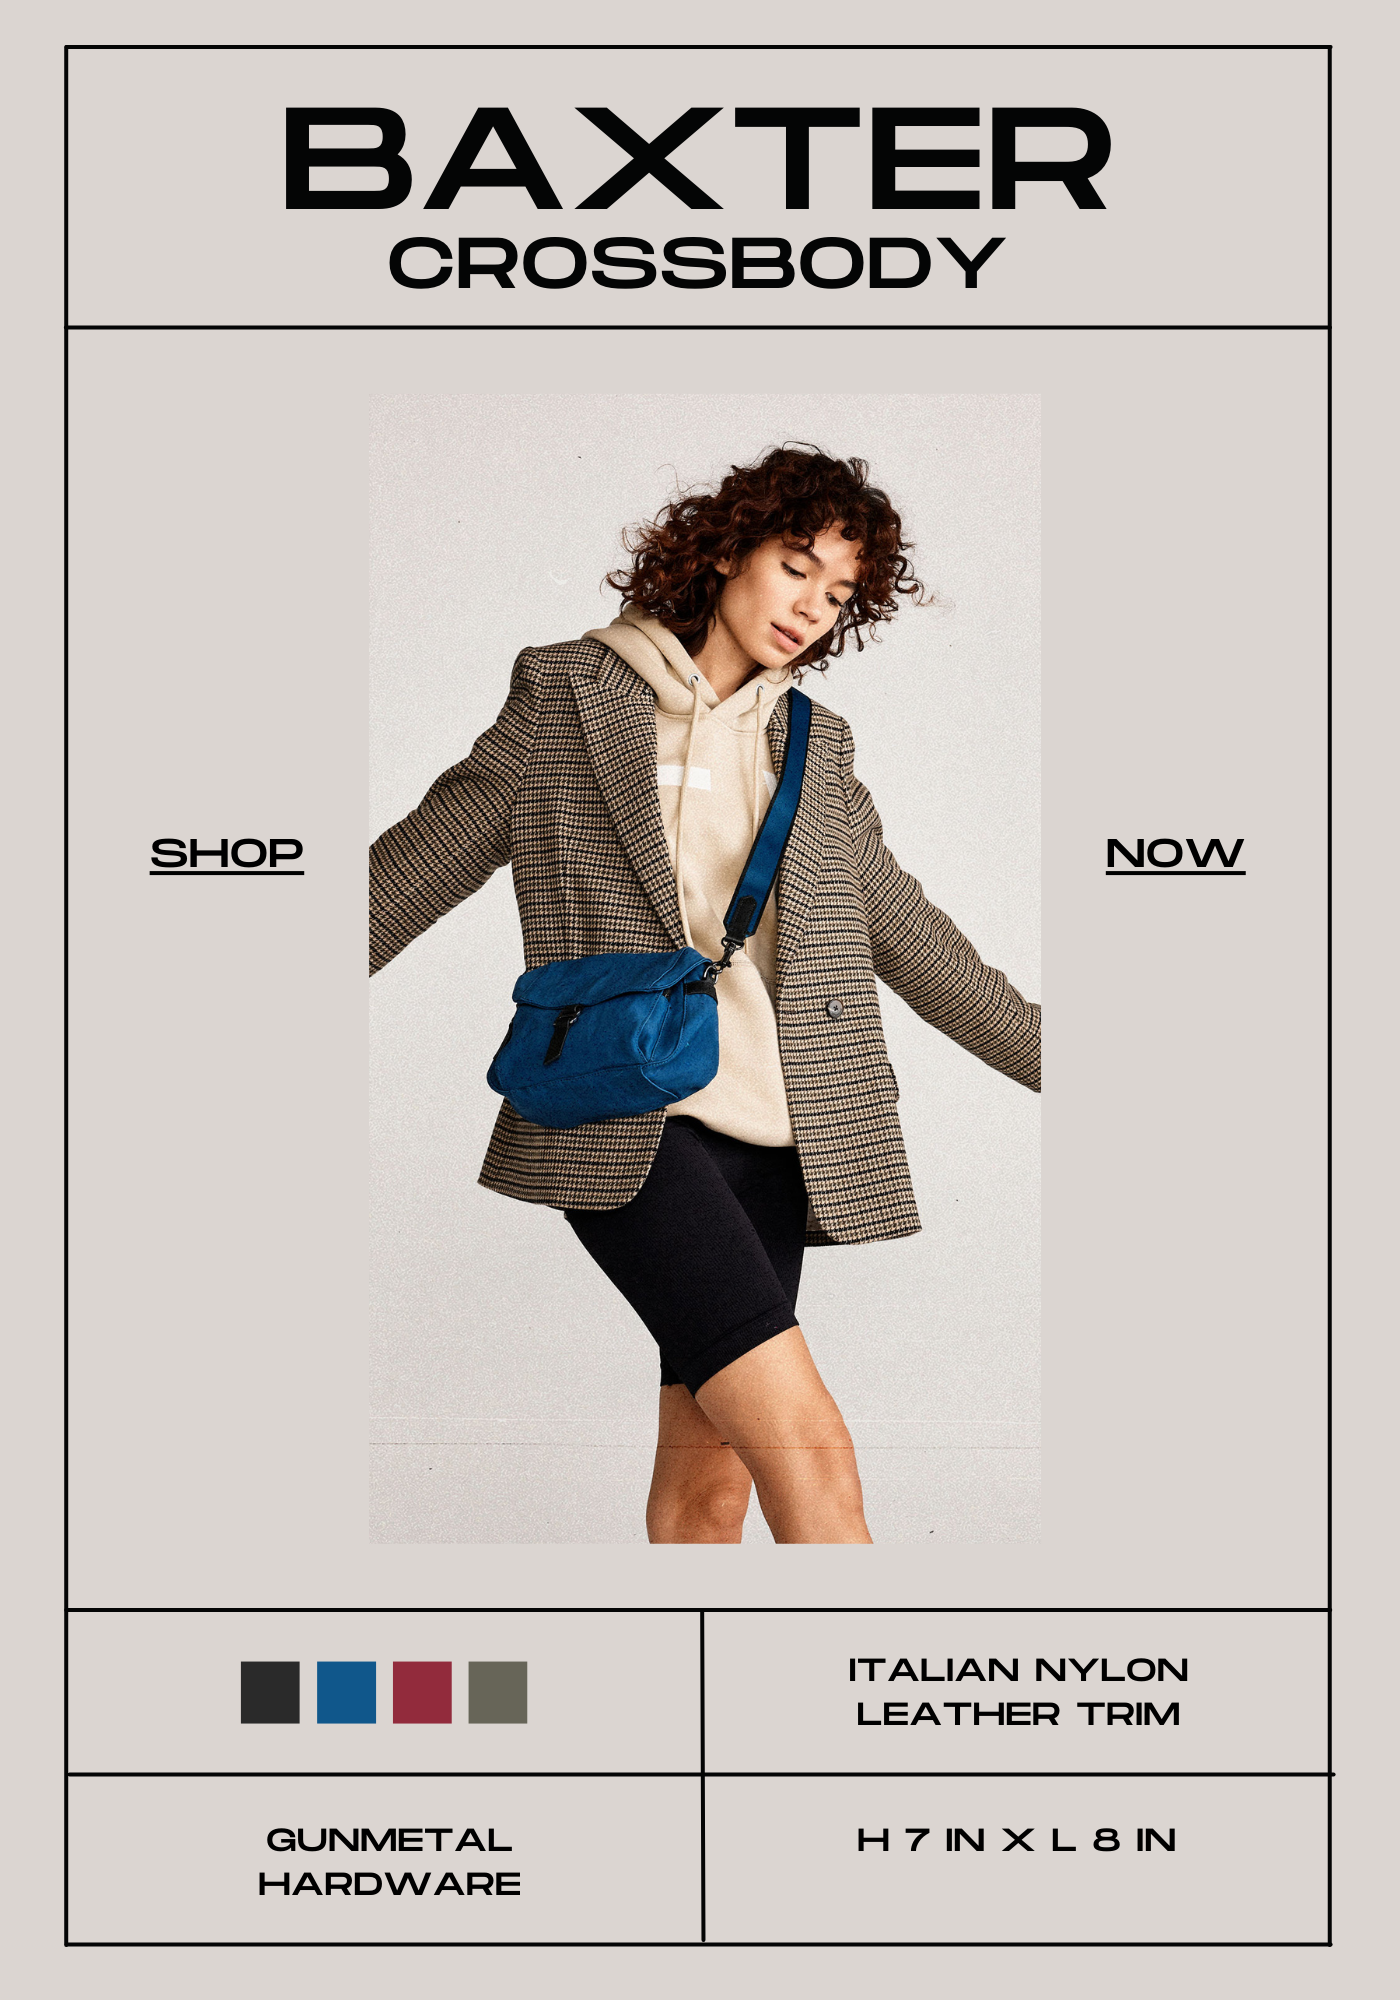 Botkier baxter nylon crossbody in teal model shot and features